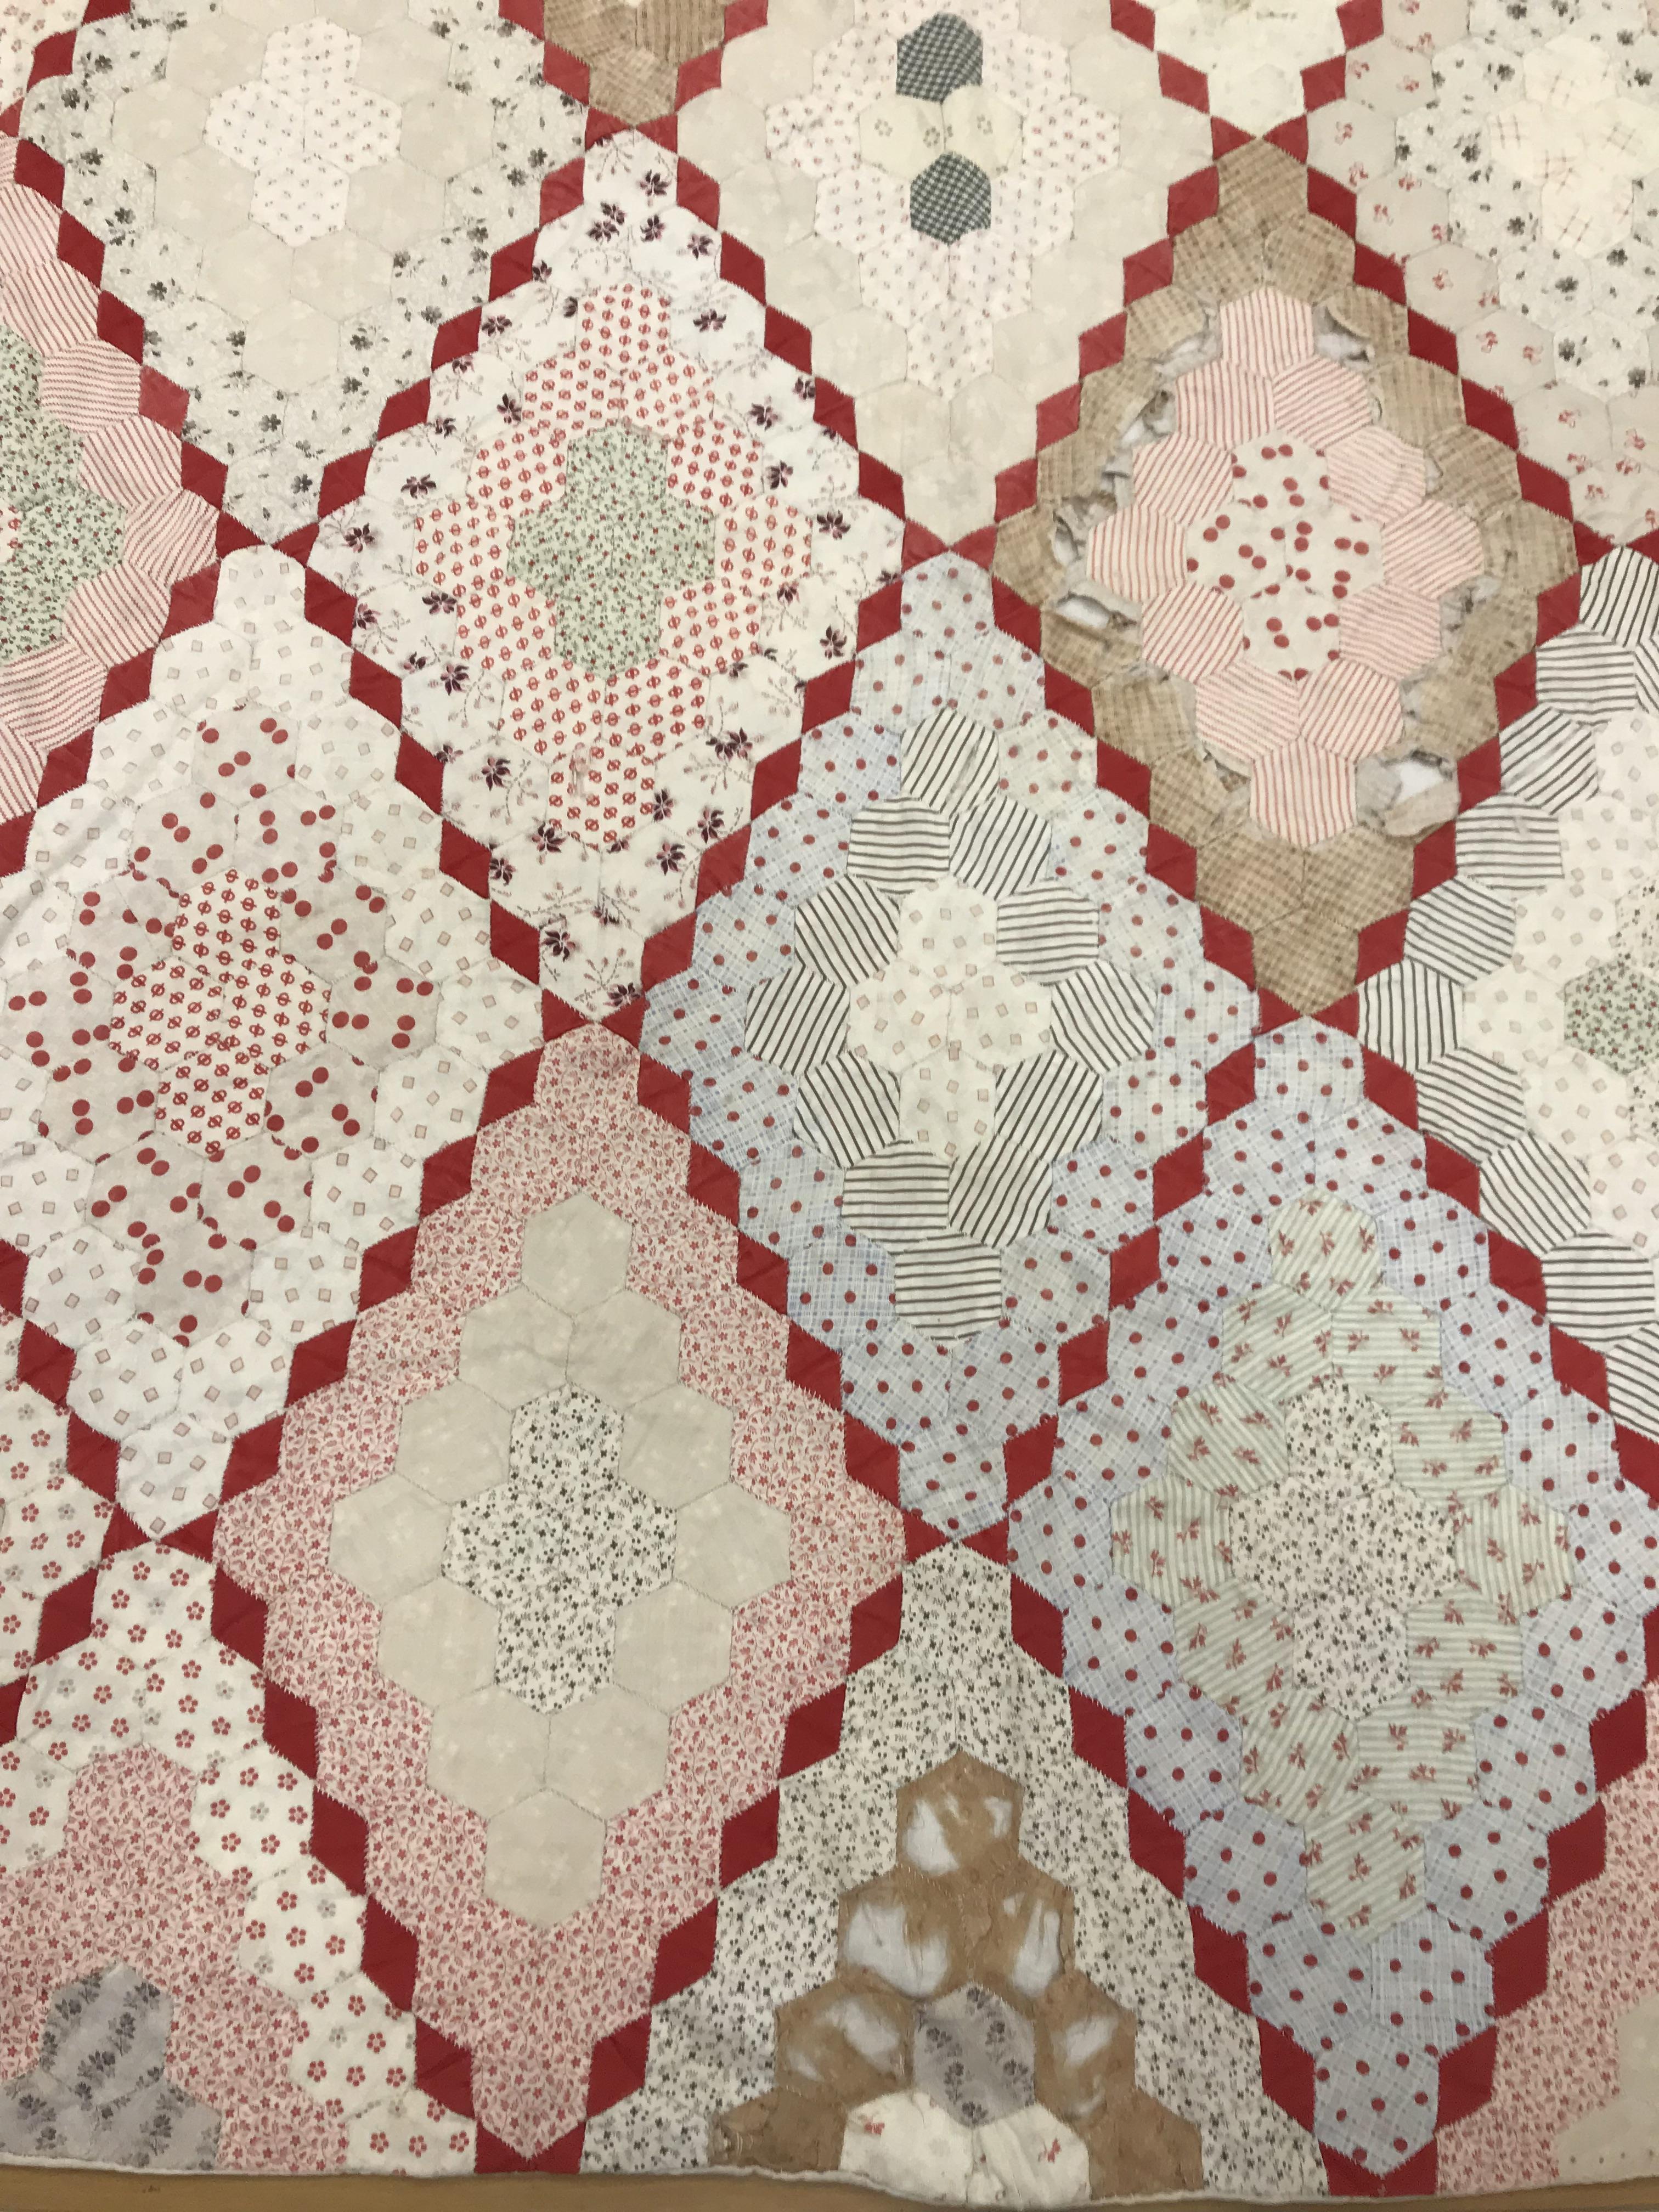 An early 20th Century hand-stitched, pieced quilt, backed with plain fabric and no wadding, - Image 3 of 36